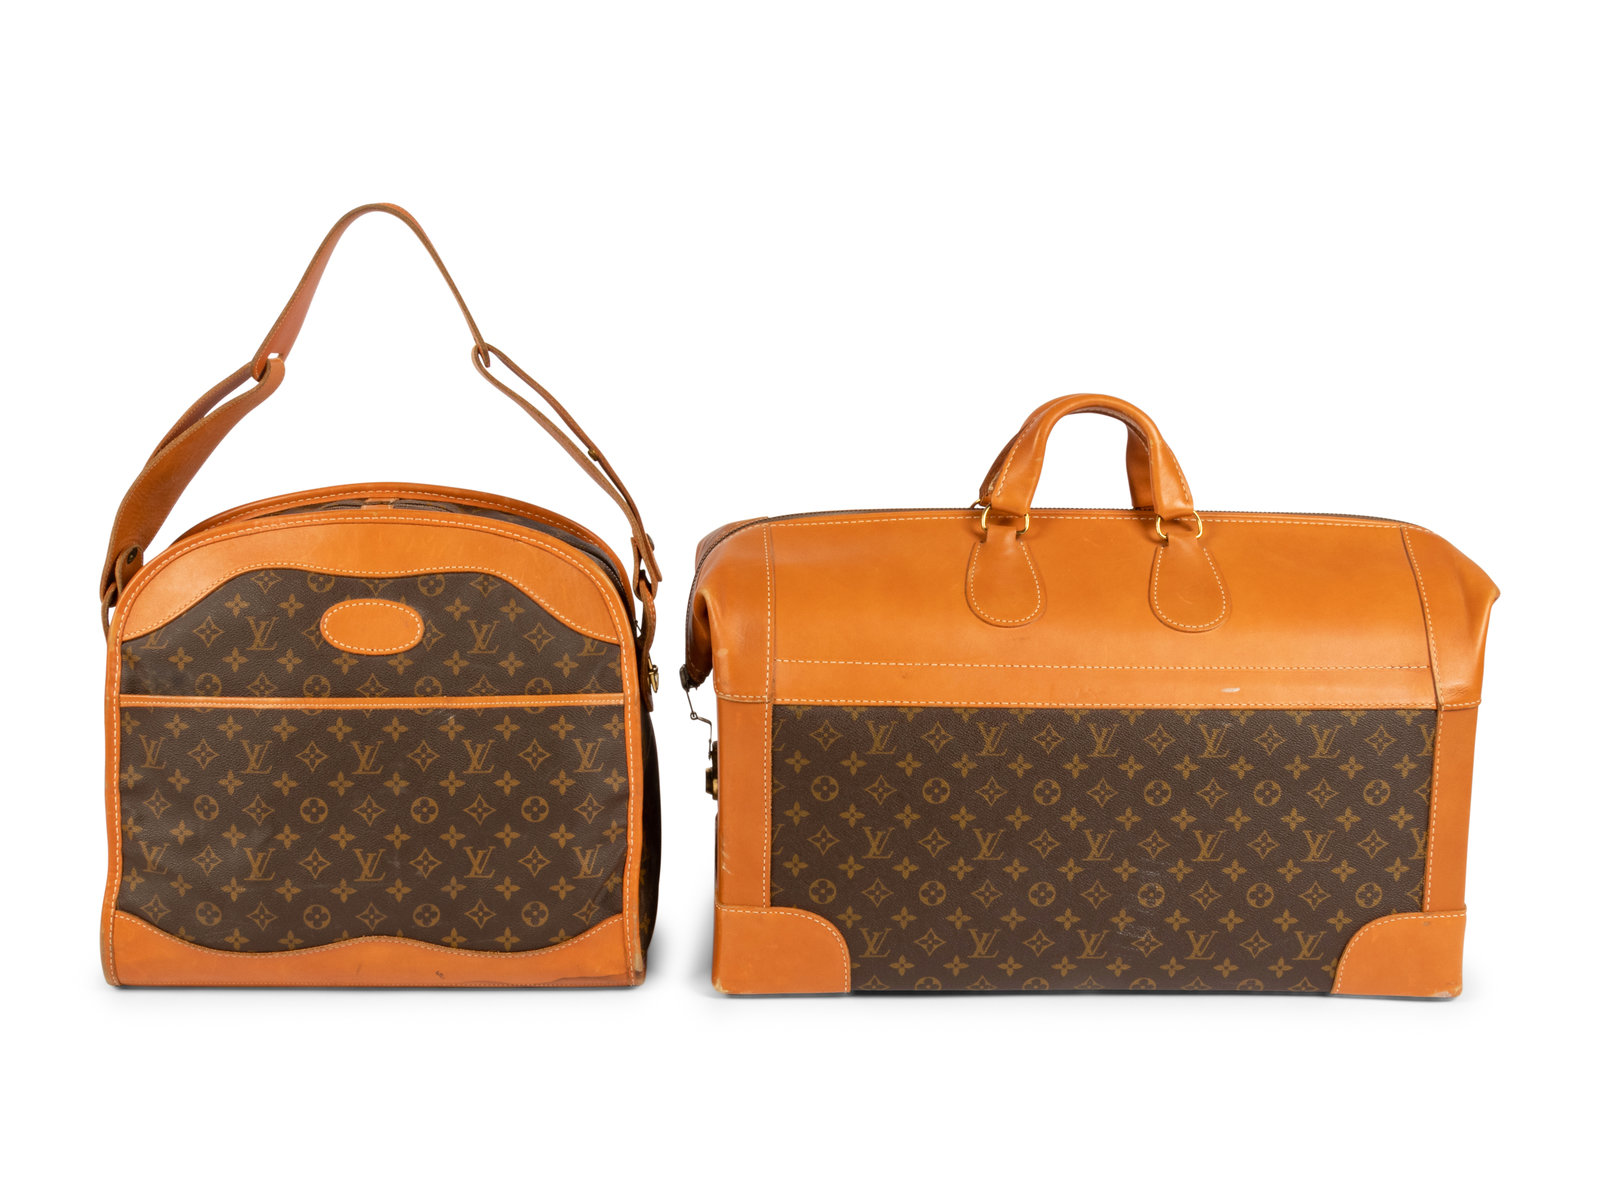 Sold at Auction: A Twin Handled Duffle Bag Marked Louis Vuitton